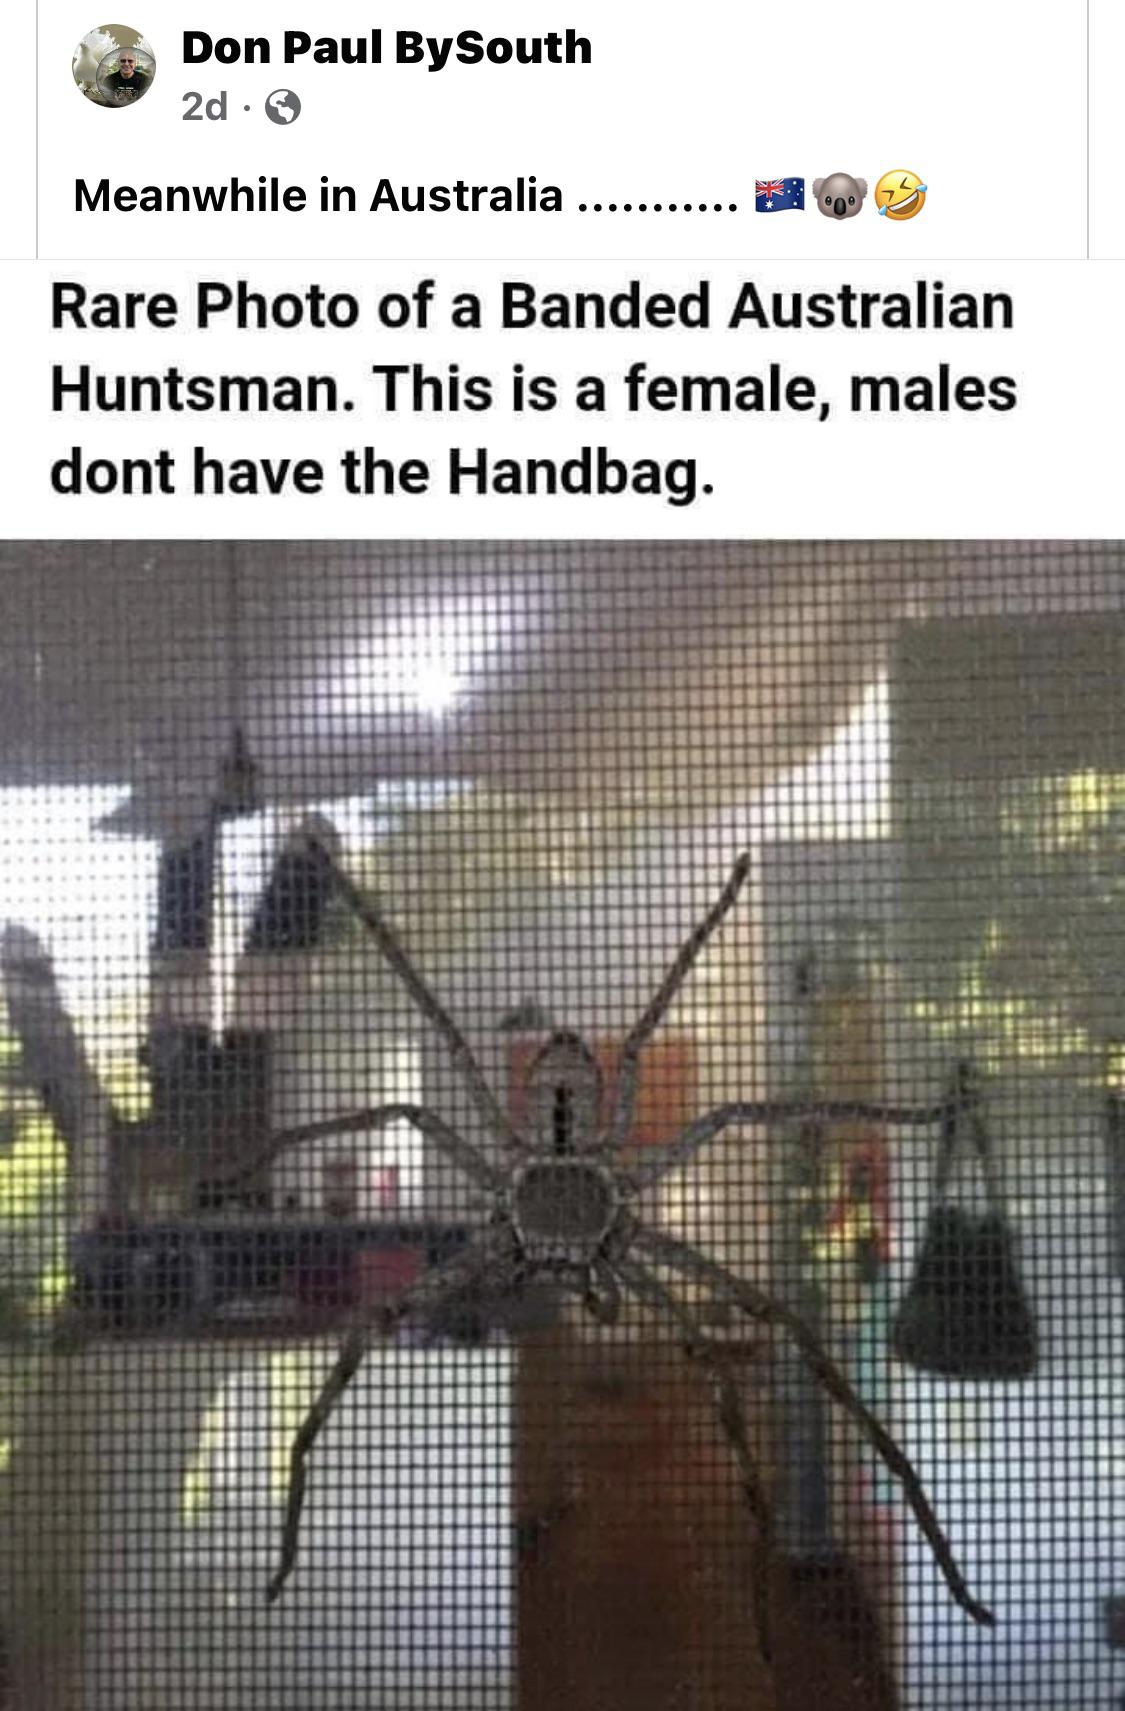 daily dose of pics and memes - fauna - Don Paul BySouth 2d Meanwhile in Australia .... ..... Rare Photo of a Banded Australian Huntsman. This is a female, males dont have the Handbag. 7